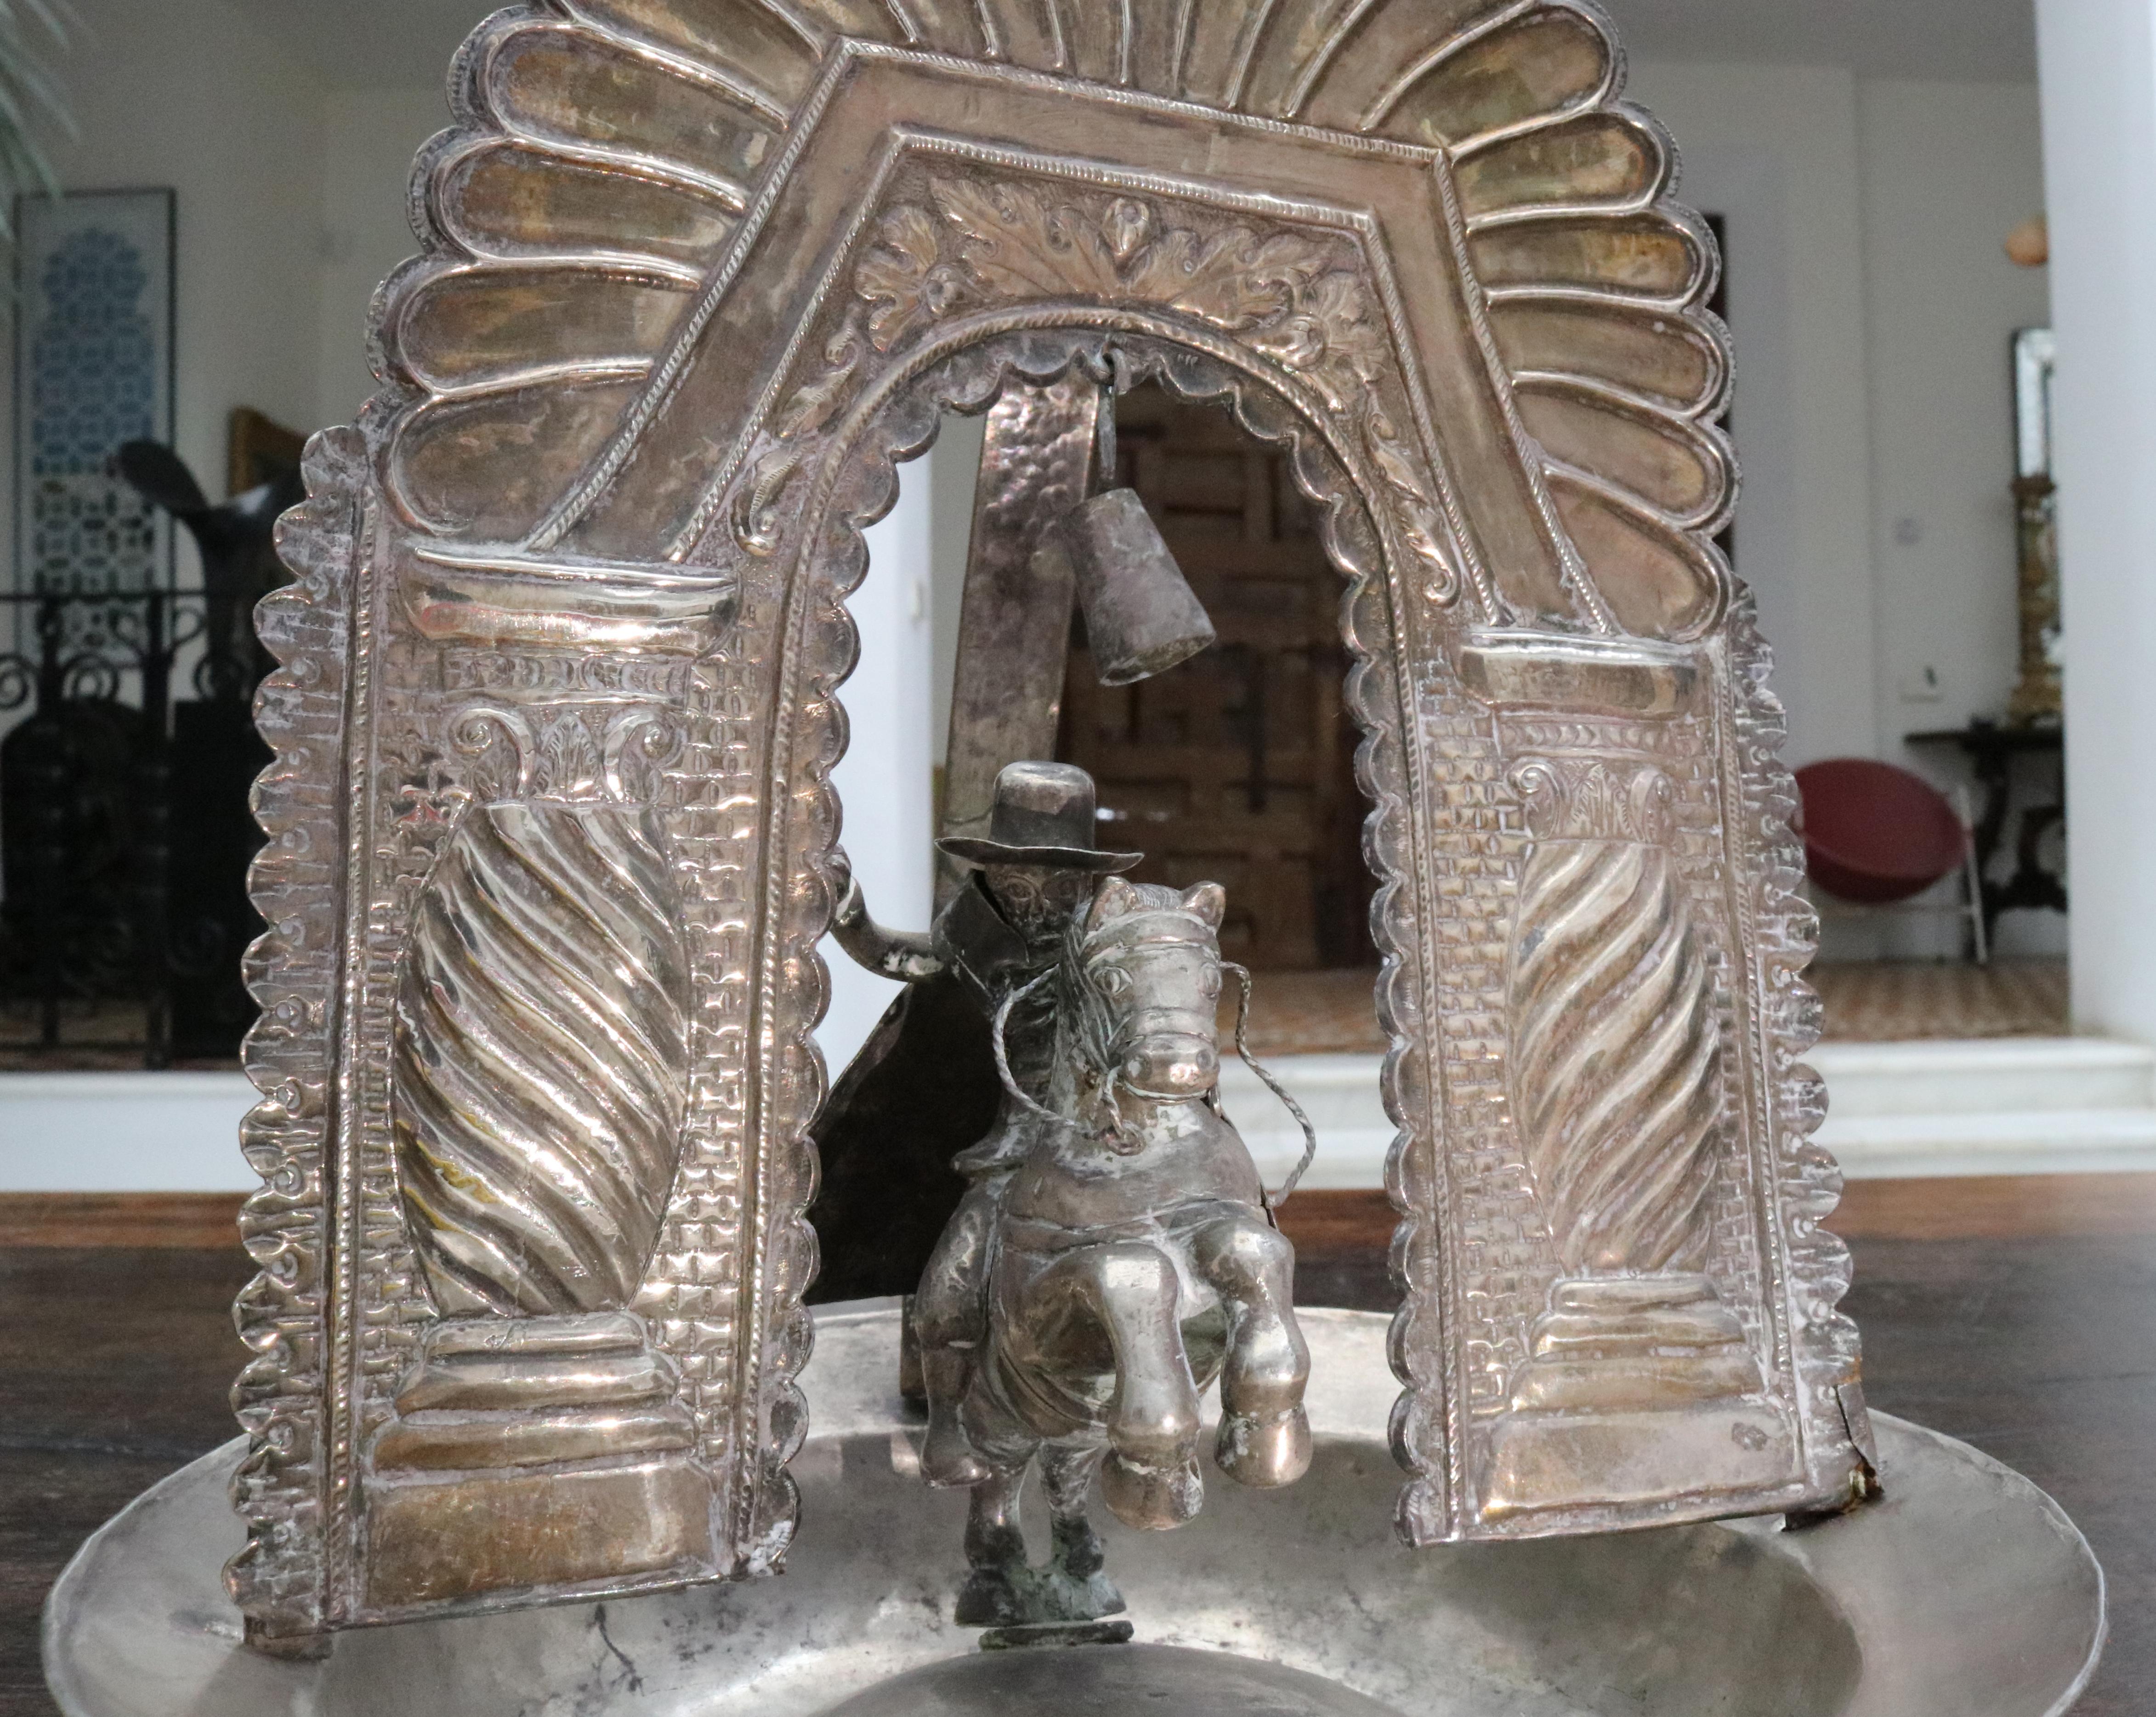 19th Century Bolivian or Peruvian Silver Alms Dish with Saint James on a Horse 2